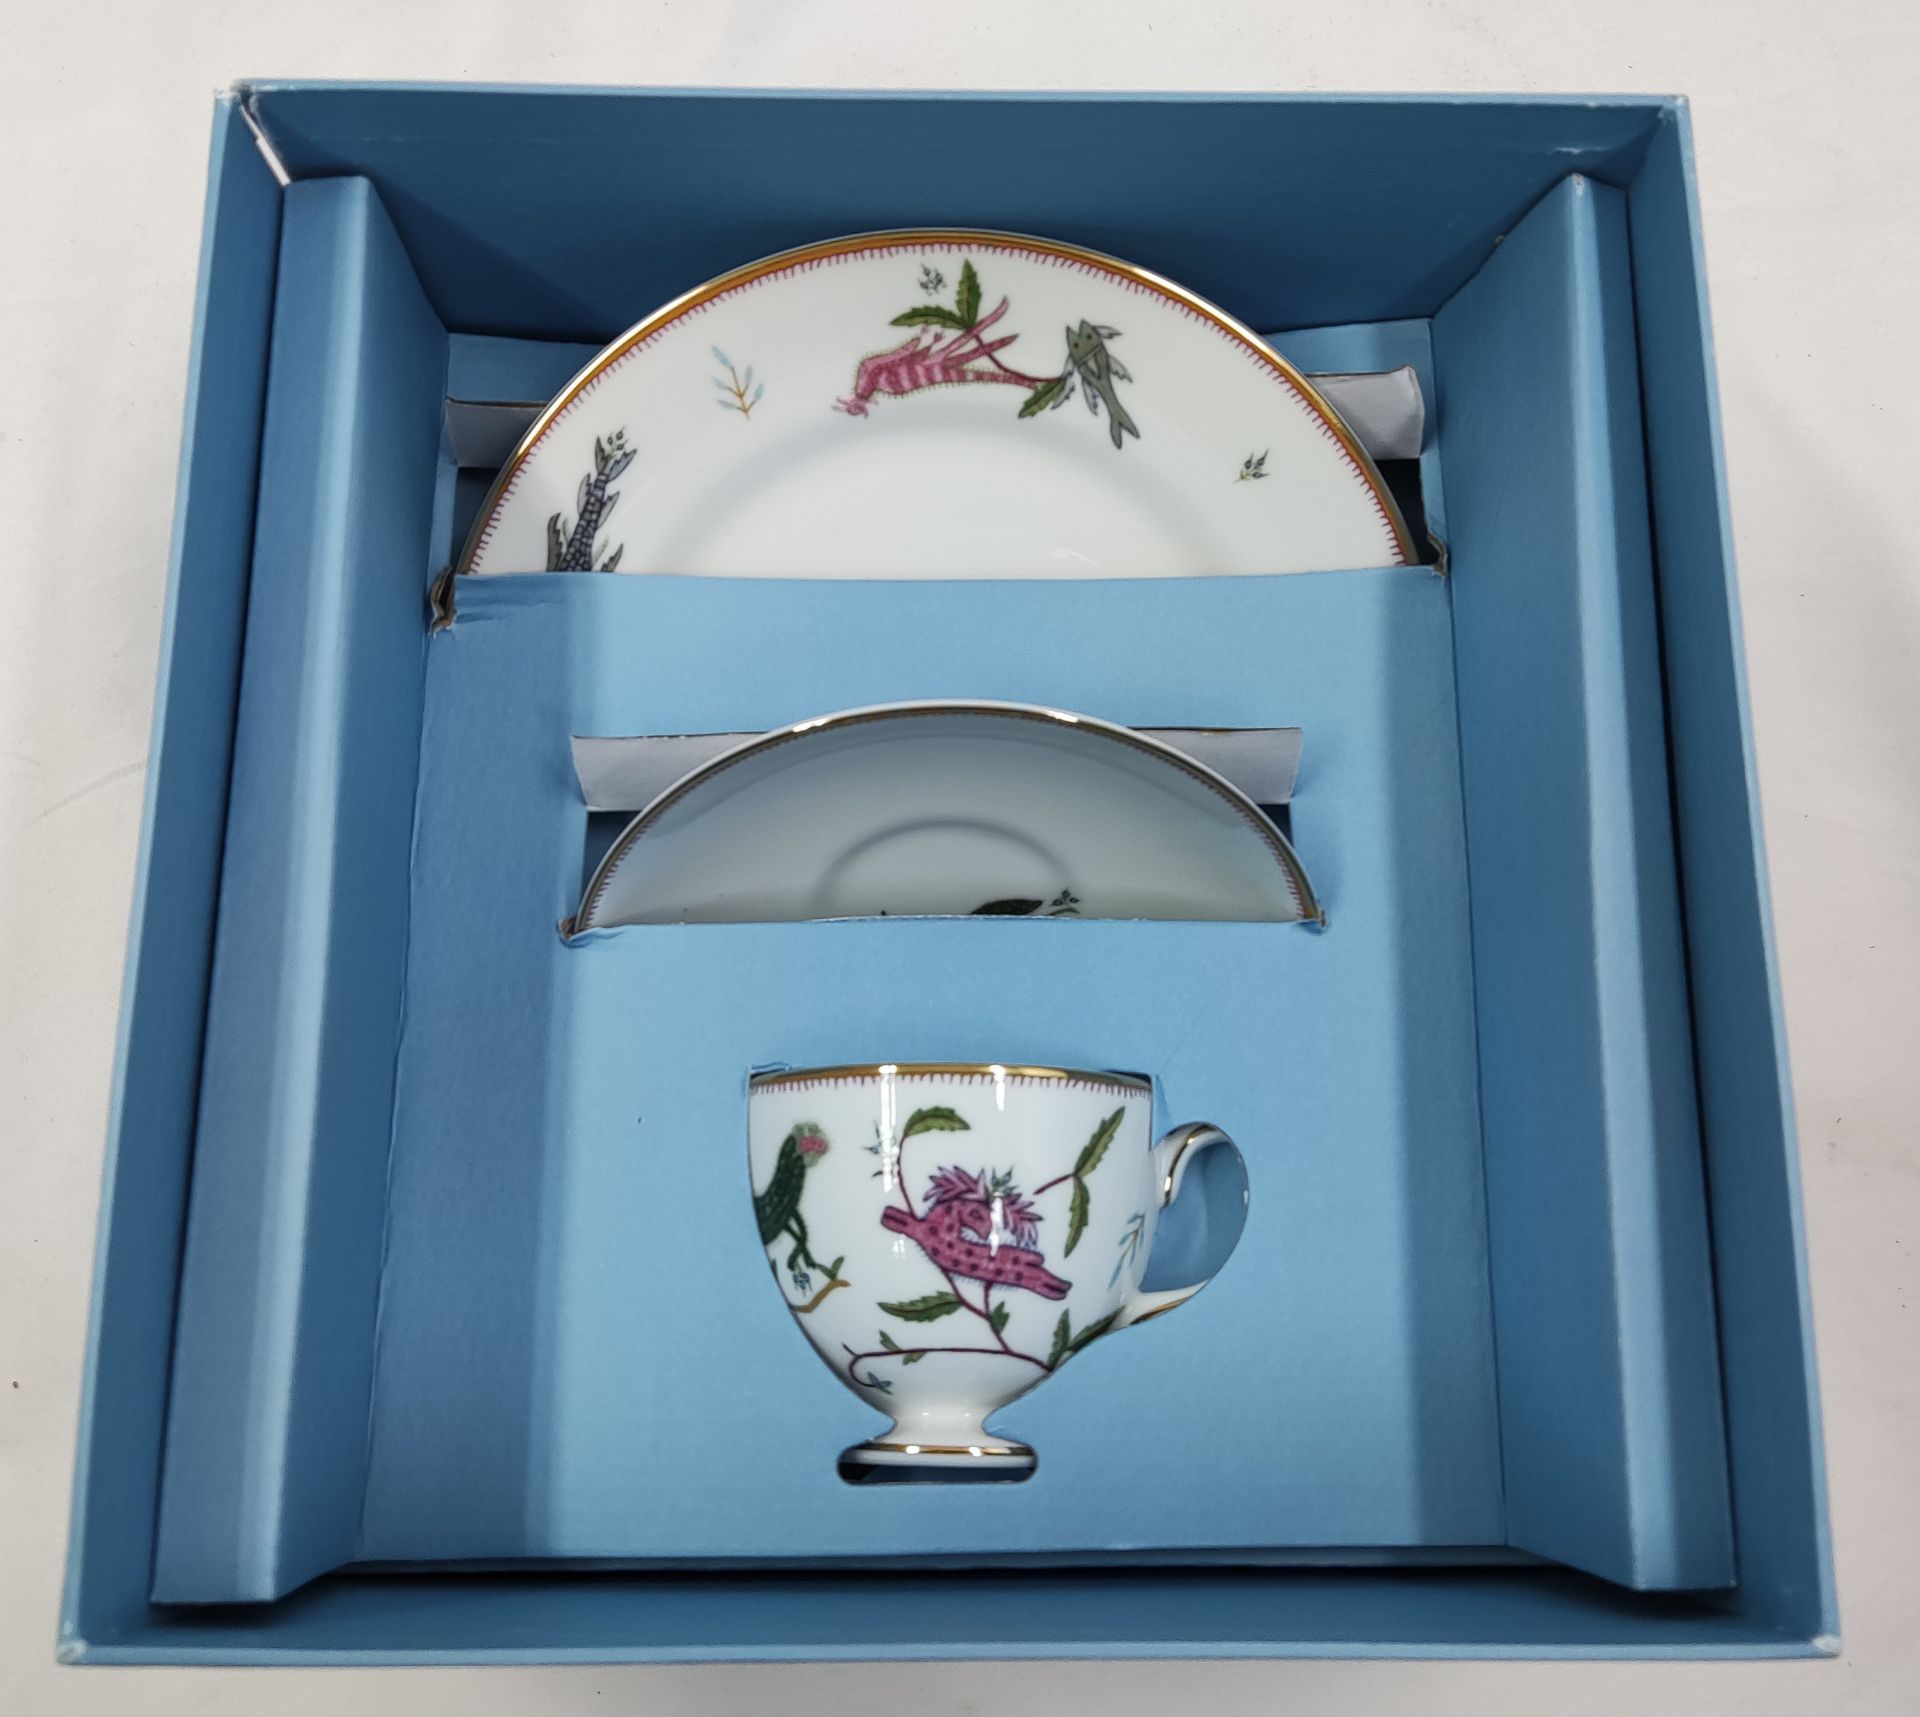 1 x WEDGWOOD Mythical Creatures Fine Bone China Teacup/Saucer/Plate Set - New/Boxed - RRP £140.00 - Image 15 of 20